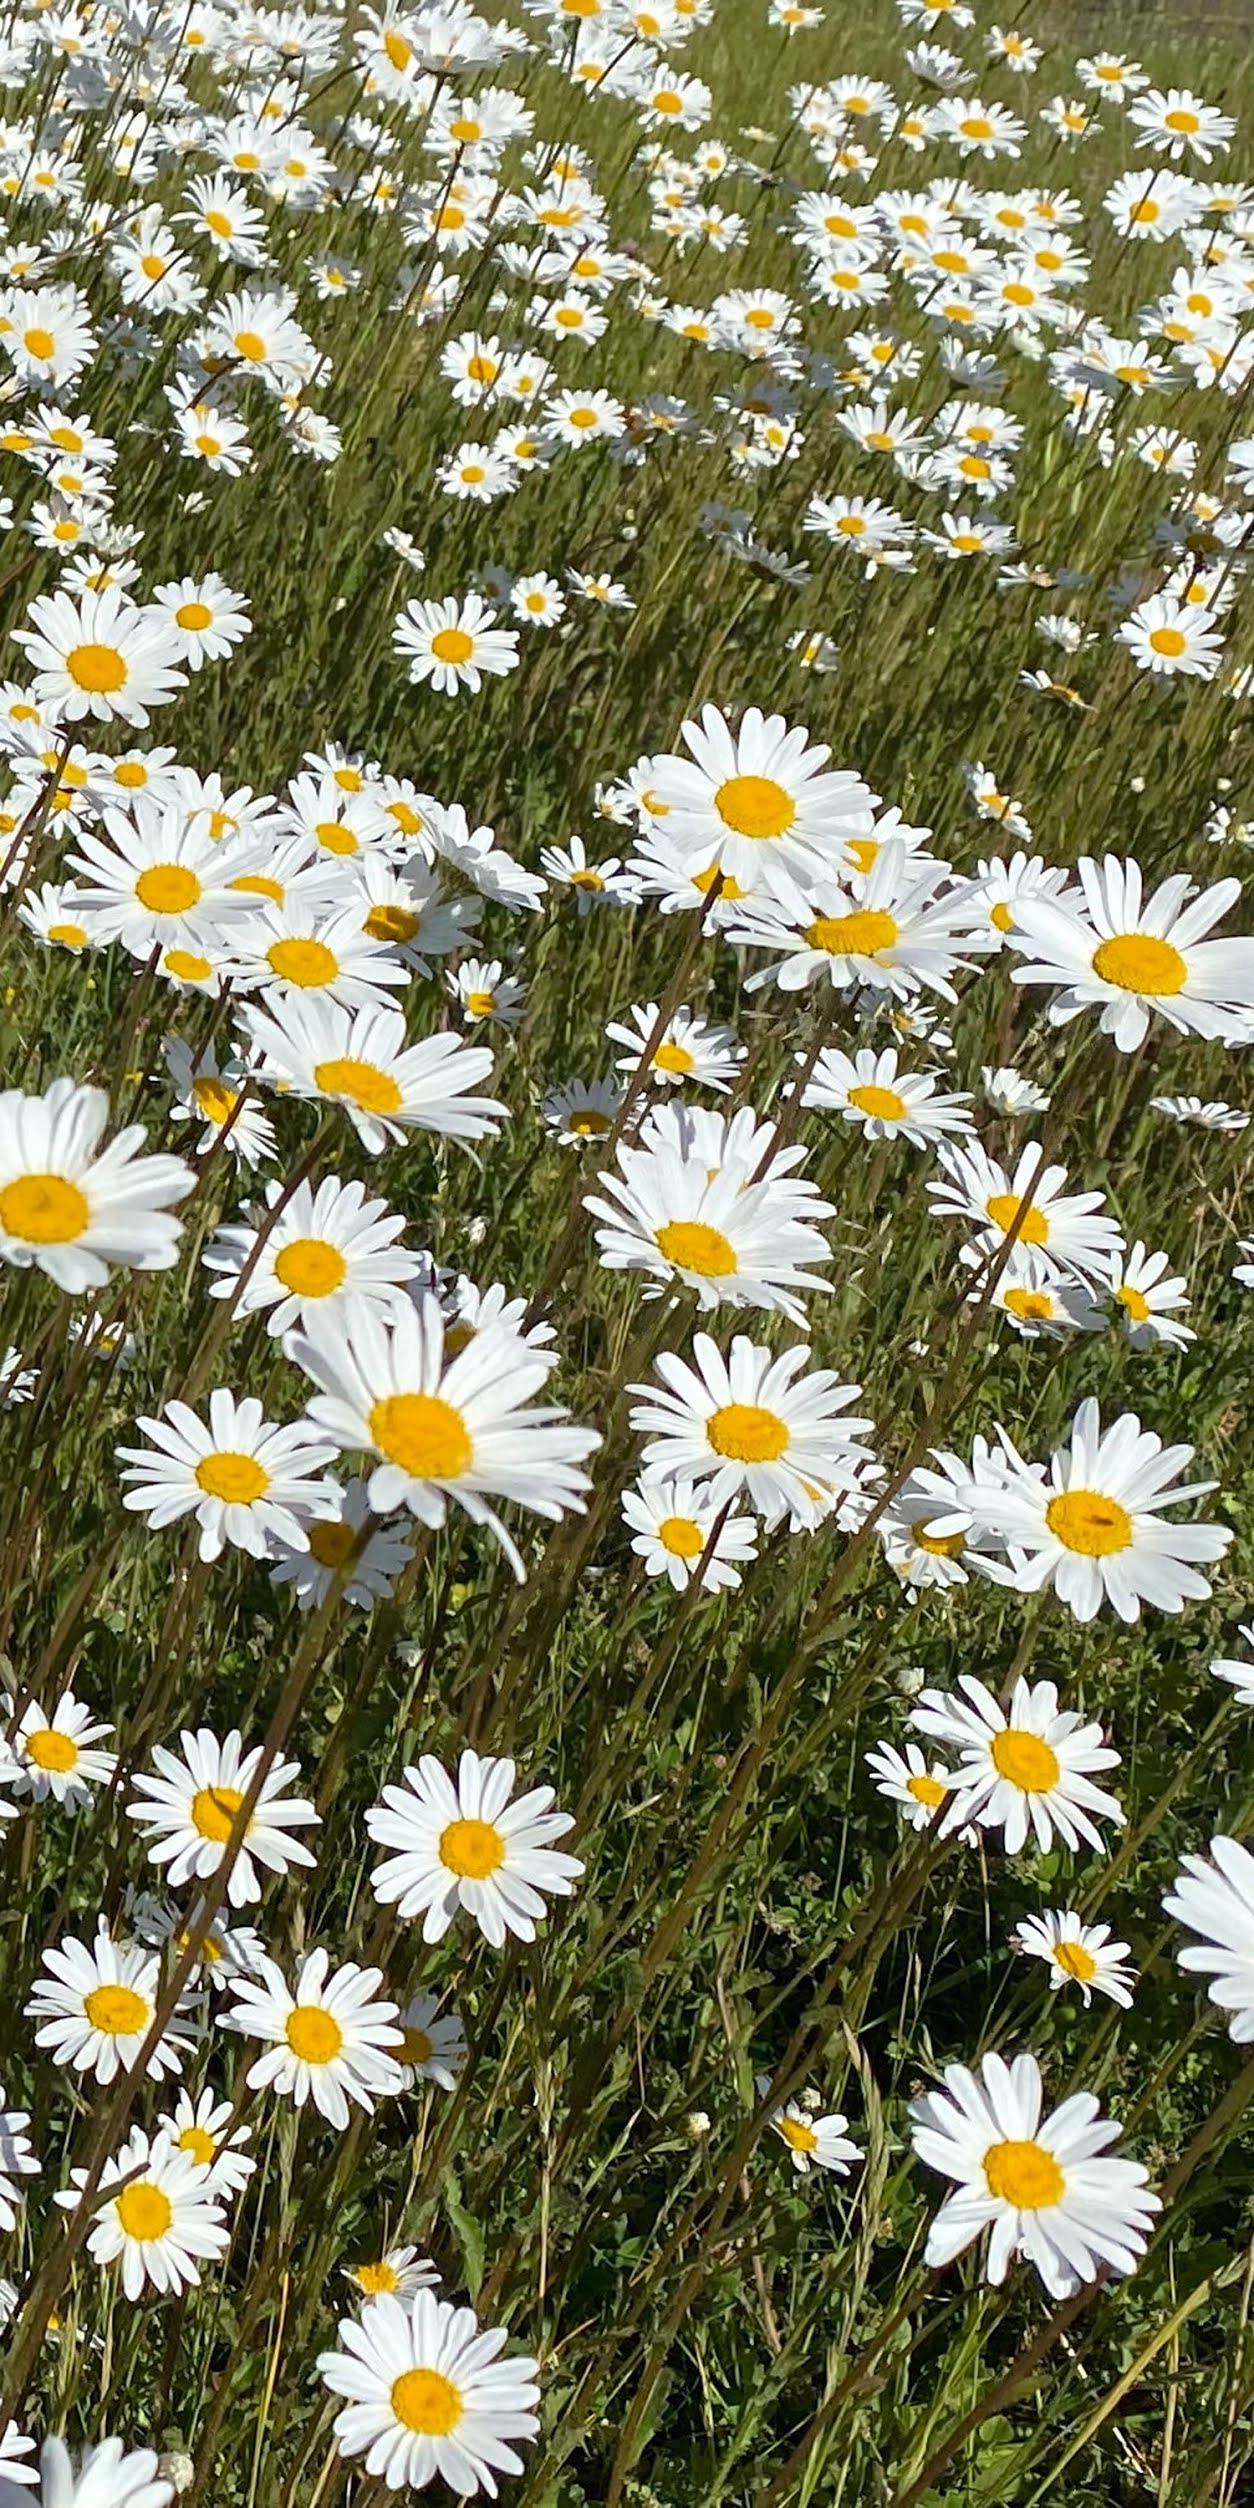 A field of white daisies with yellow centers - Daisy